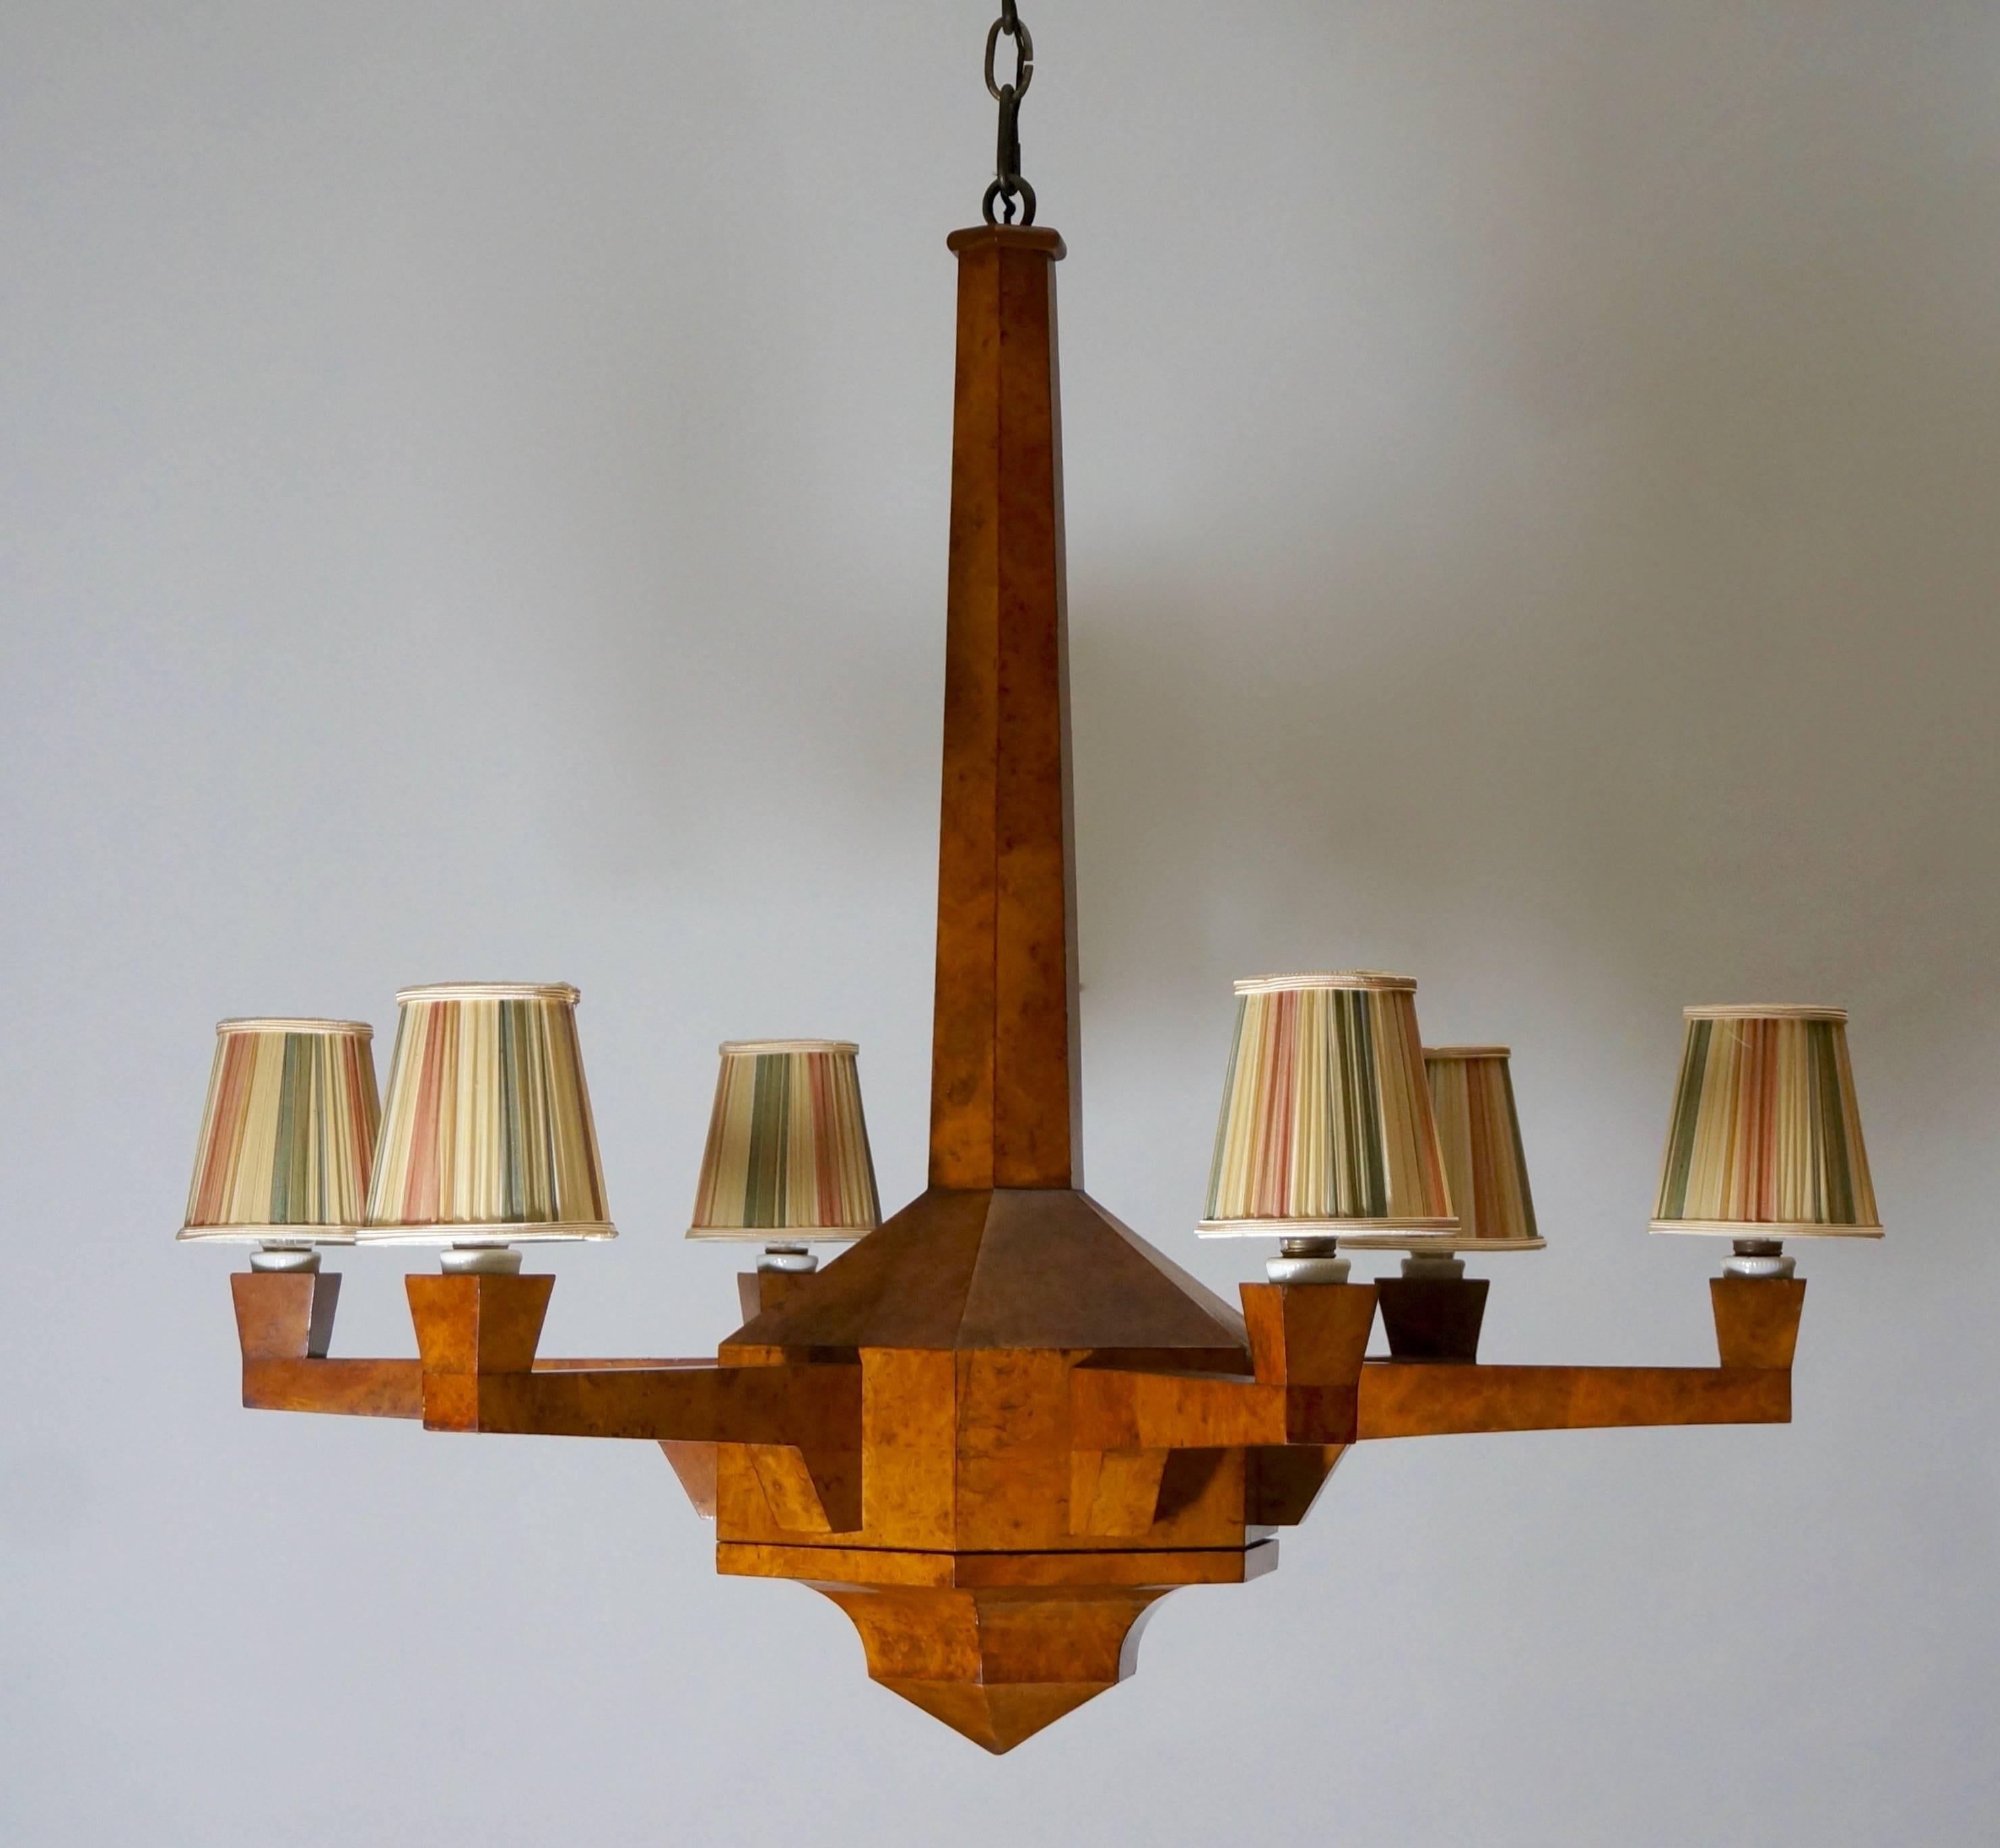 An Italian Art Deco burl wood chandelier; the central stem and six arms in a beautifully carved burl wood veneer.
Italy, circa 1930
Measures: 
Diameter 90 cm.
Height 85 cm.
Shades shown are for demonstration purposes only.